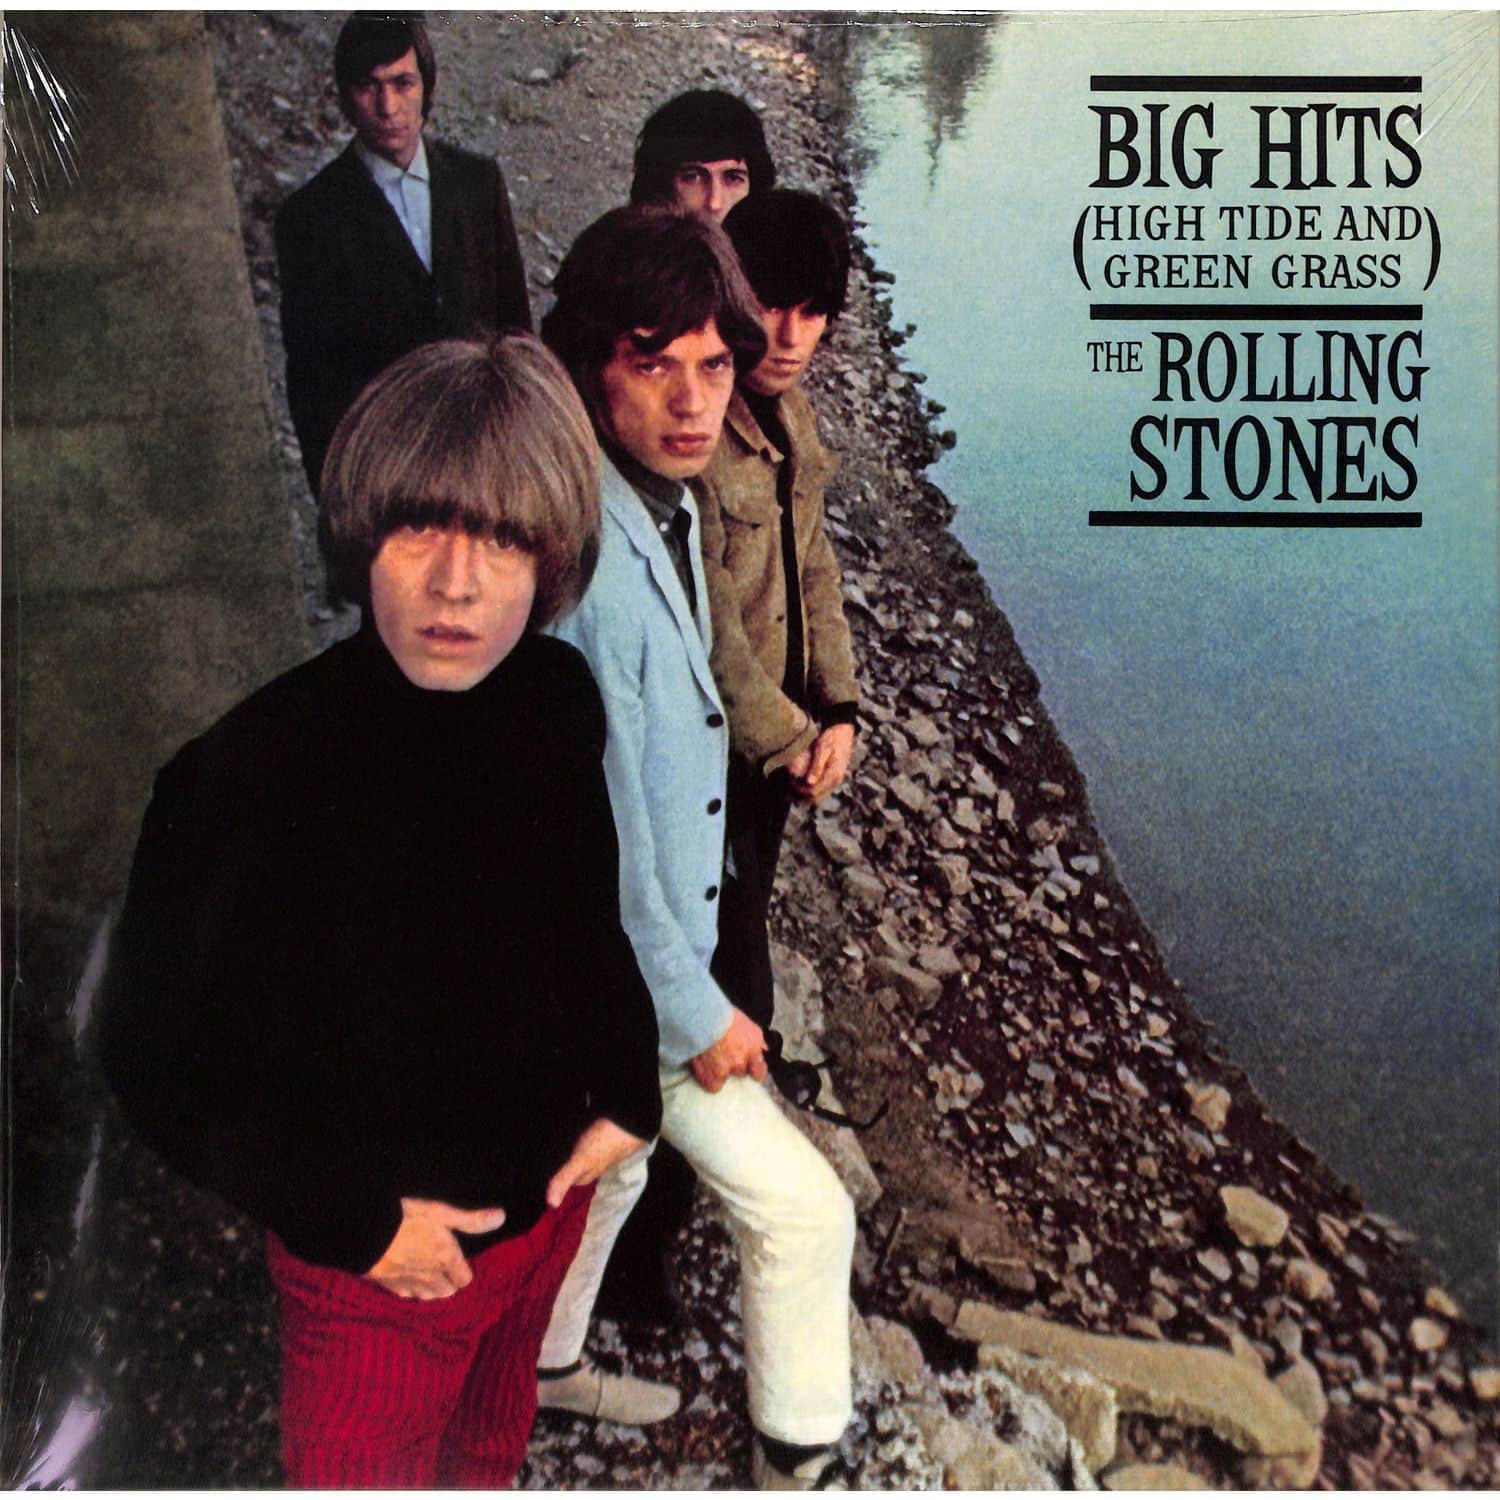 The Rolling Stones - BIG HITS 